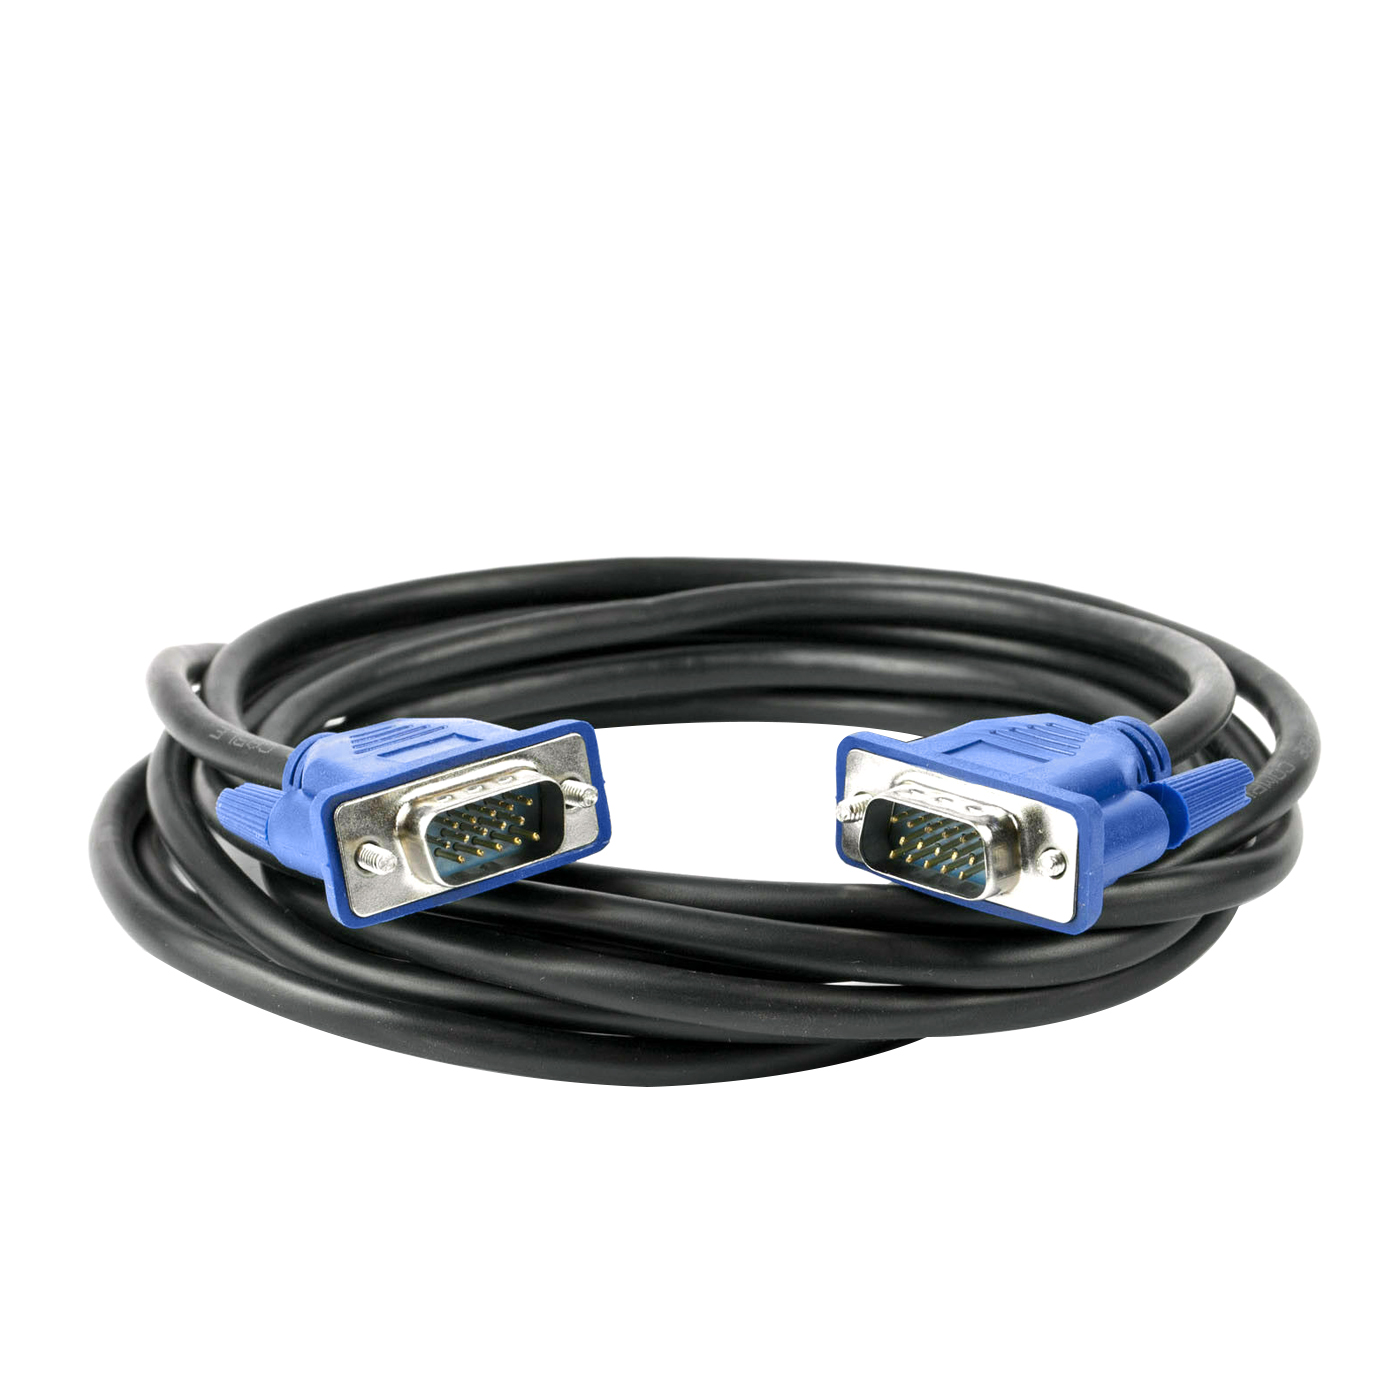 5m 3m 10m VGA 15 Pin Male Cable For PC Monitor Computer TFT Extension TV Lead 